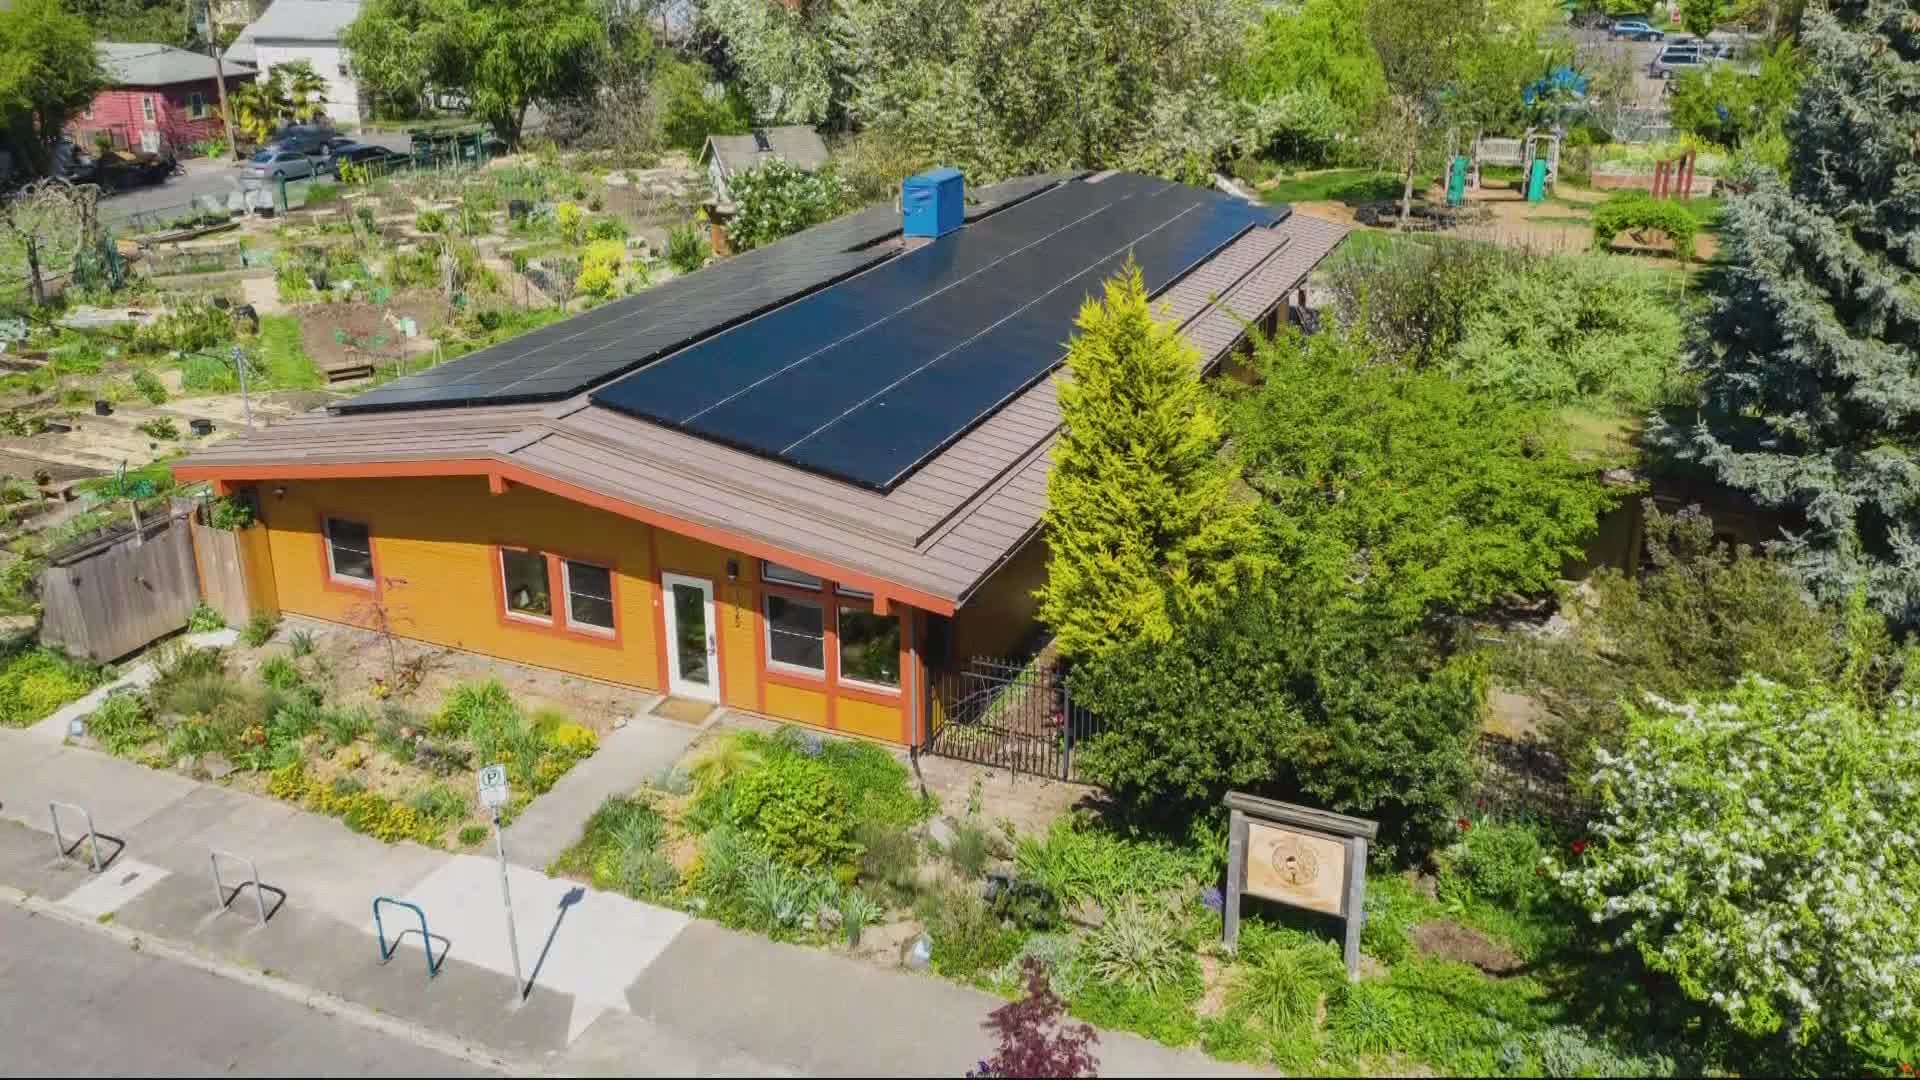 If this pandemic has taught us anything, it’s the importance of clean air. Keely Chalmers takes us to a Portland preschool that provides clean air with zero energy.